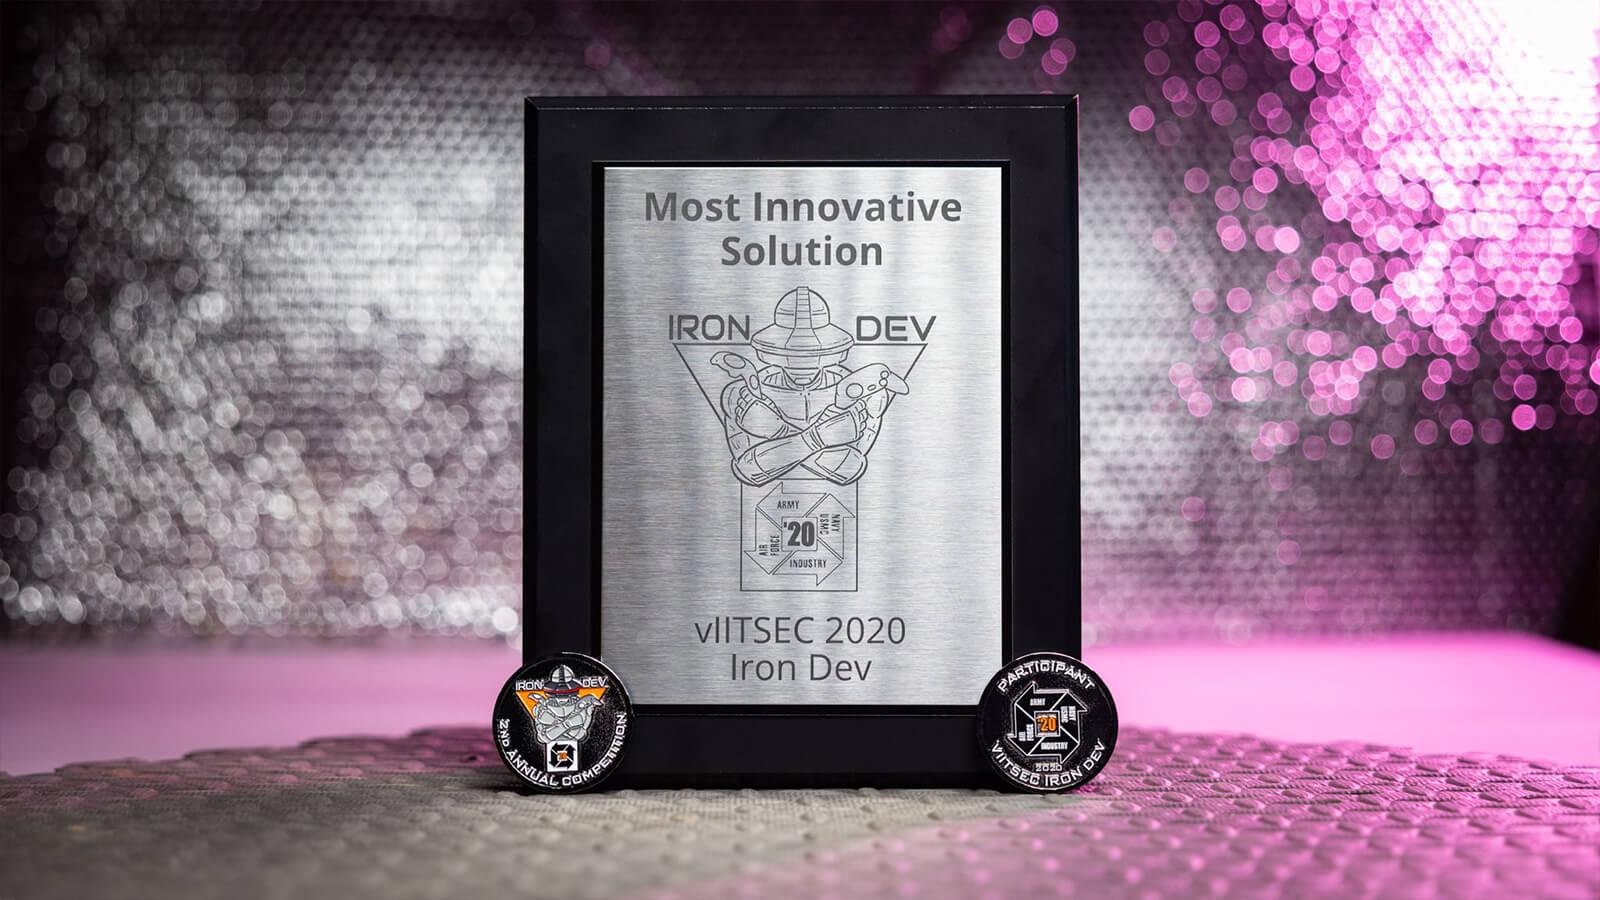 Full Sail Team Wins 'Most Innovative Solution' at 2020 Iron Dev Competition - Hero image 